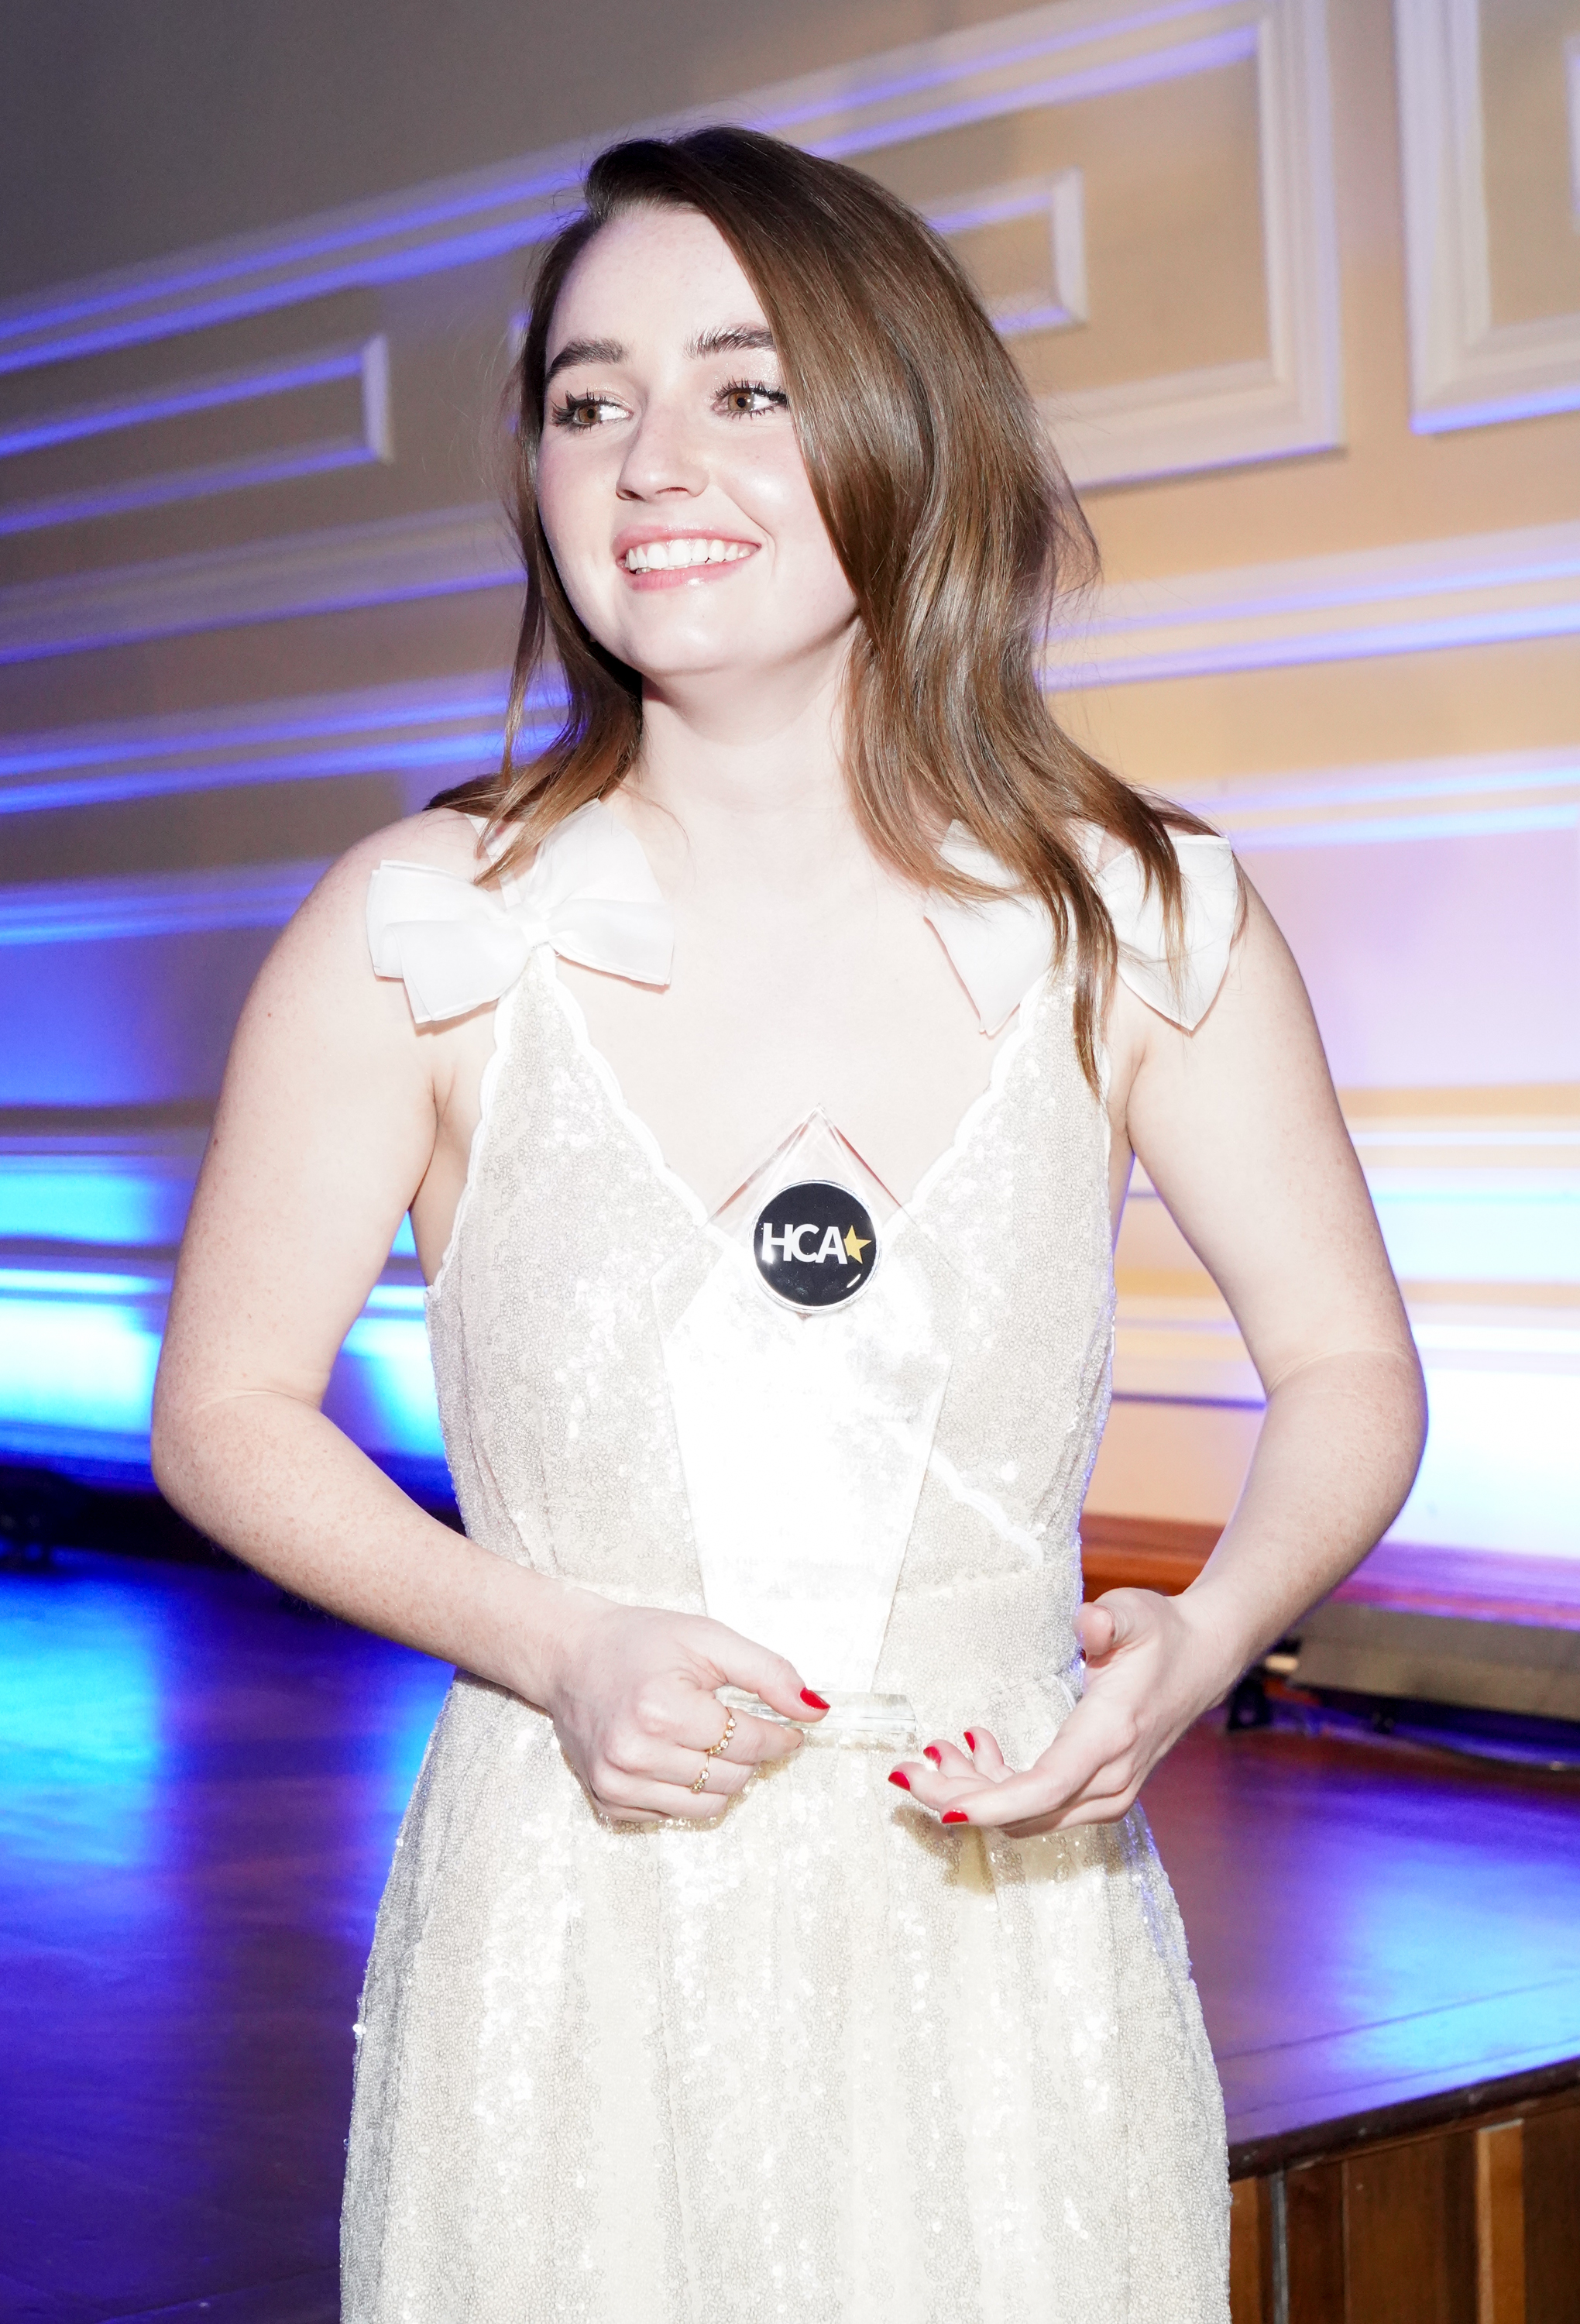 Kaitlyn Dever wins Best Performance By An Actress 23 And Under for "Booksmart" at the 3rd Annual Hollywood Critics Awards at Taglyan Complex on January 09, 2020 in Los Angeles, California. | Source: Getty Images